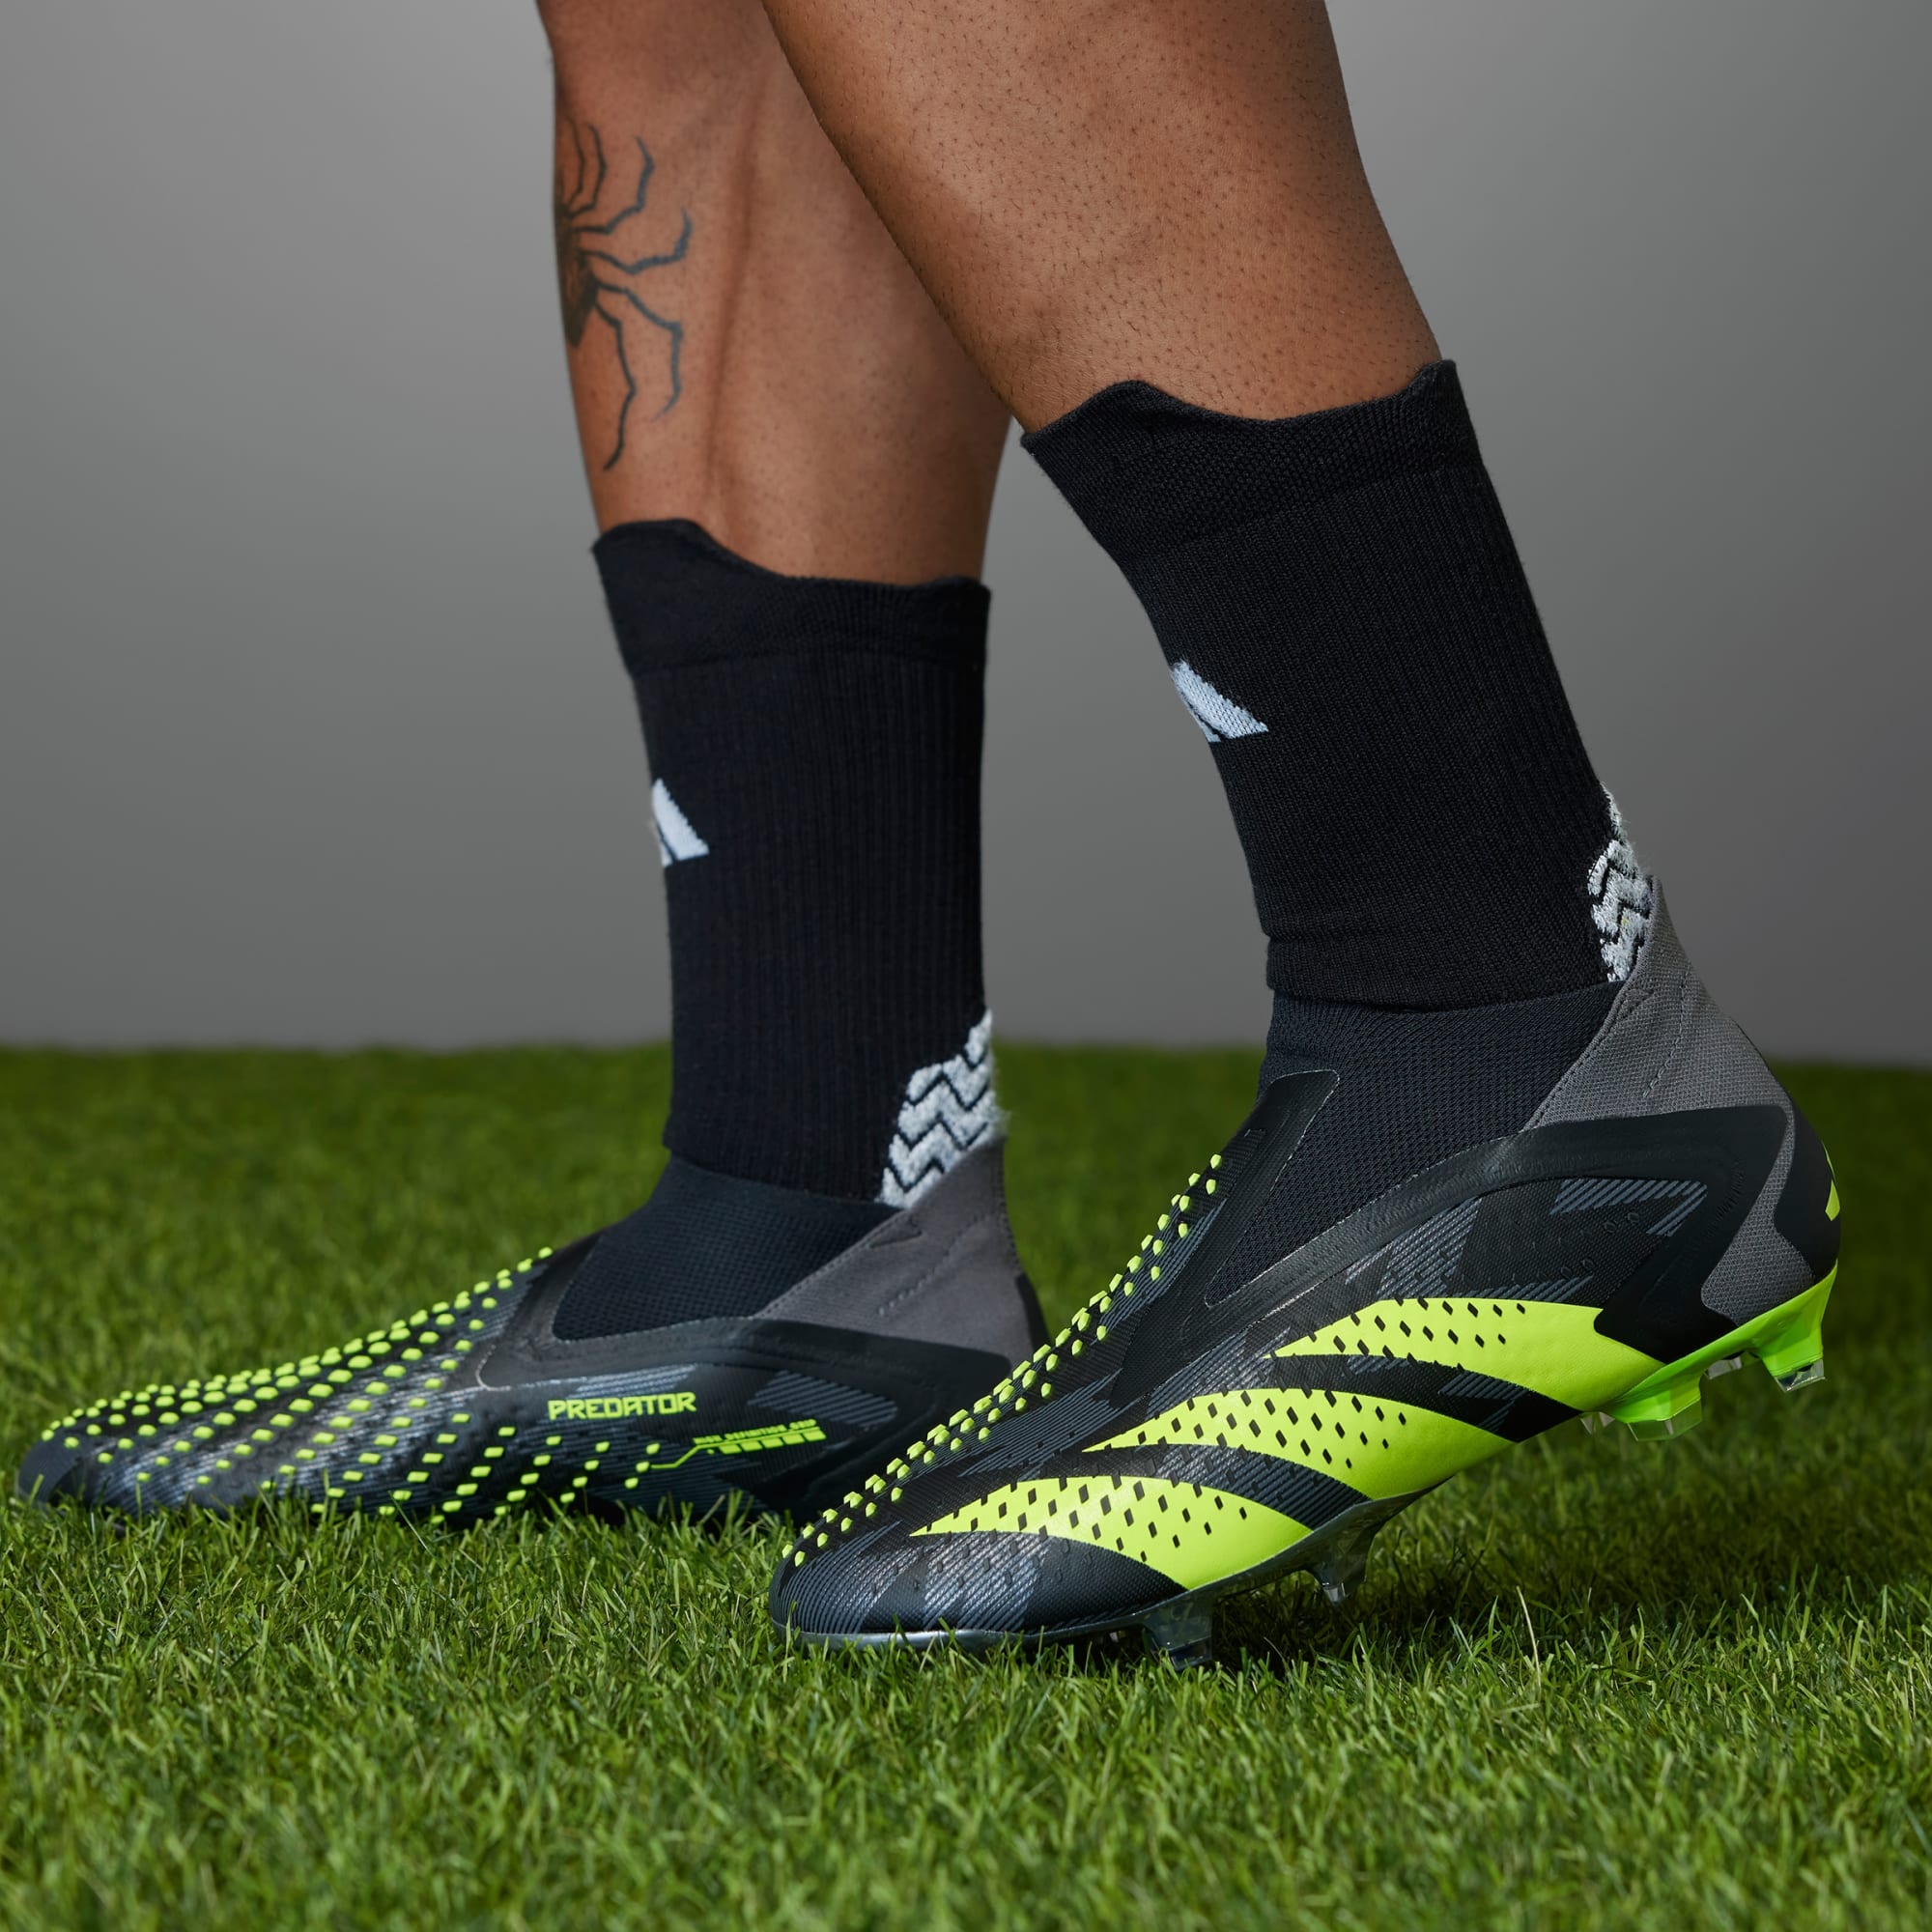 adidas PREDATOR ACCURACY INJECTION+ FIRM GROUND SOCCER CLEATS - Niky's ...